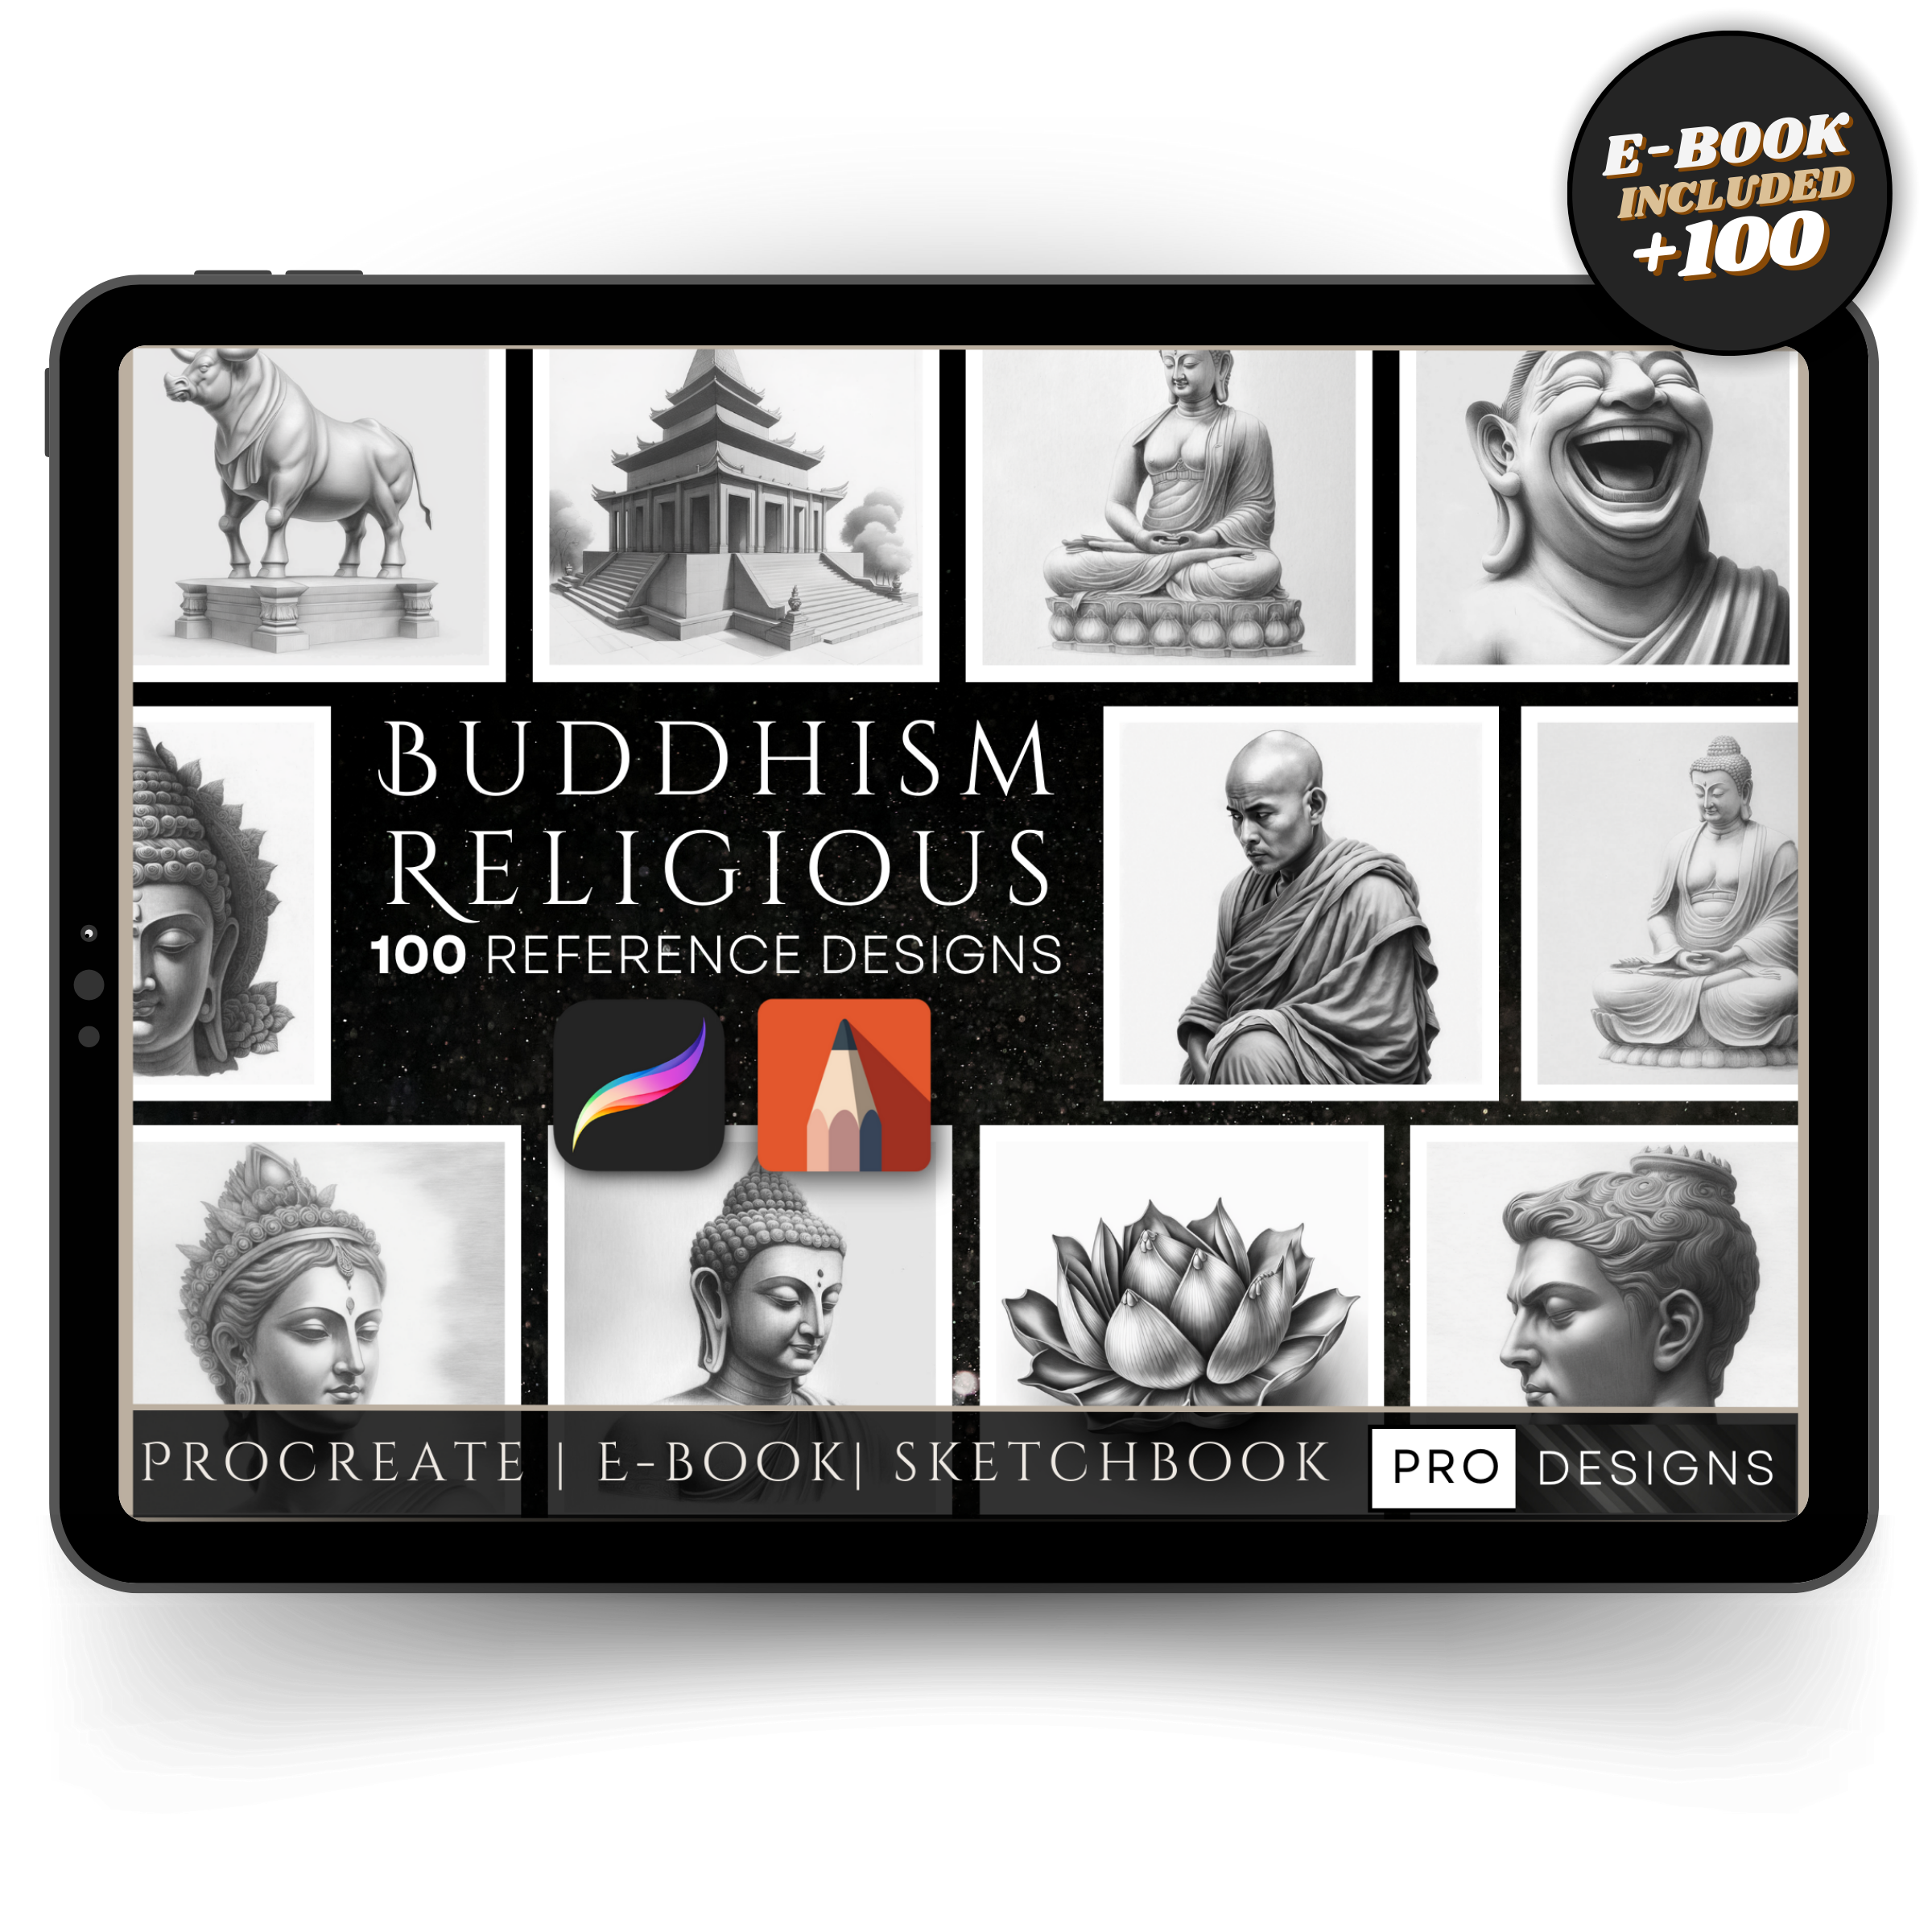 "Buddhism Collection" - A Journey of Serenity and Enlightenment